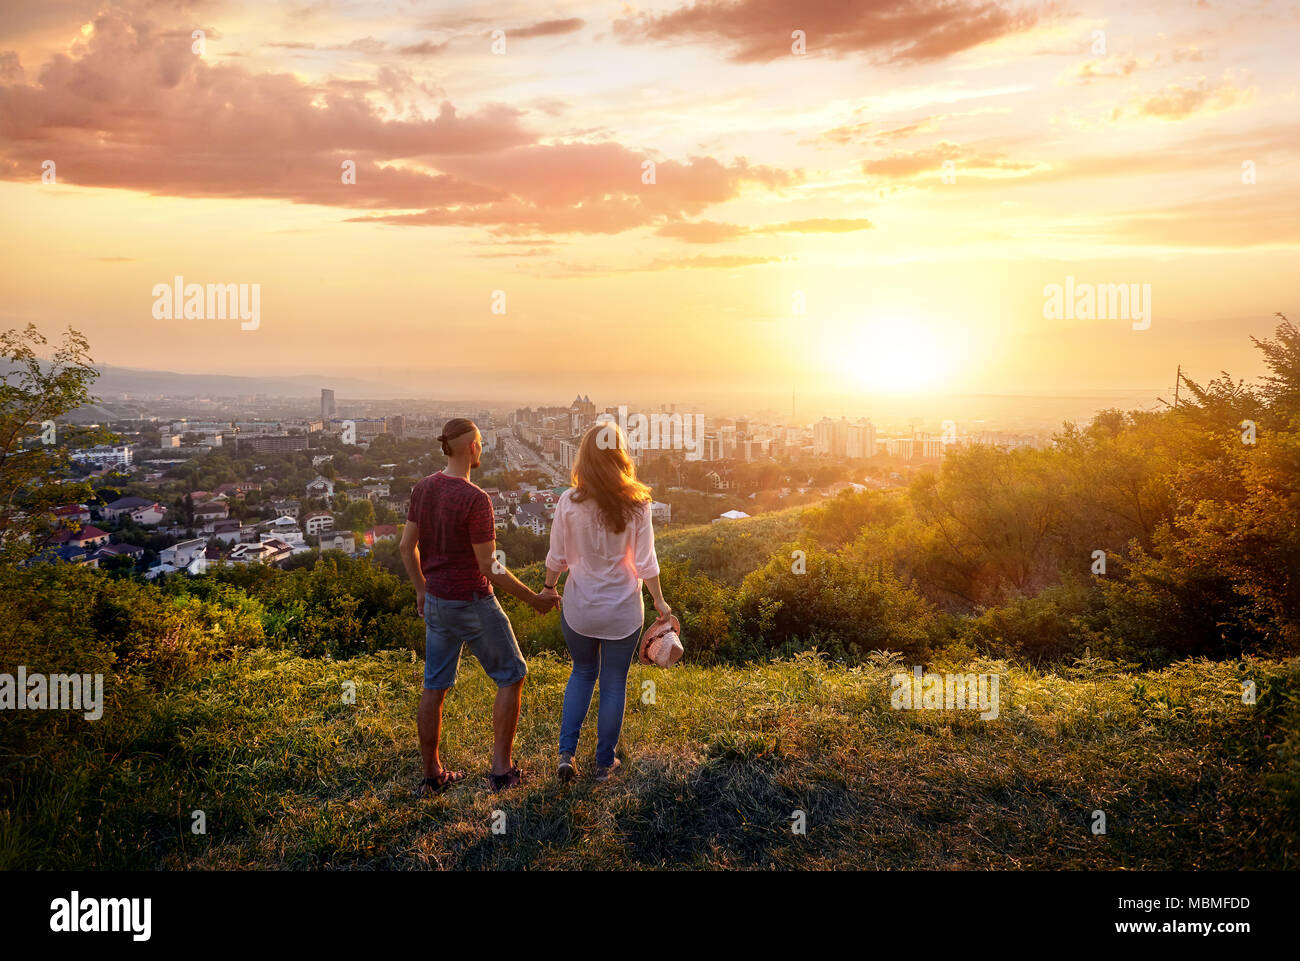 Yong couple in pink clothes holding by hands and looking at the sunset city Stock Photo